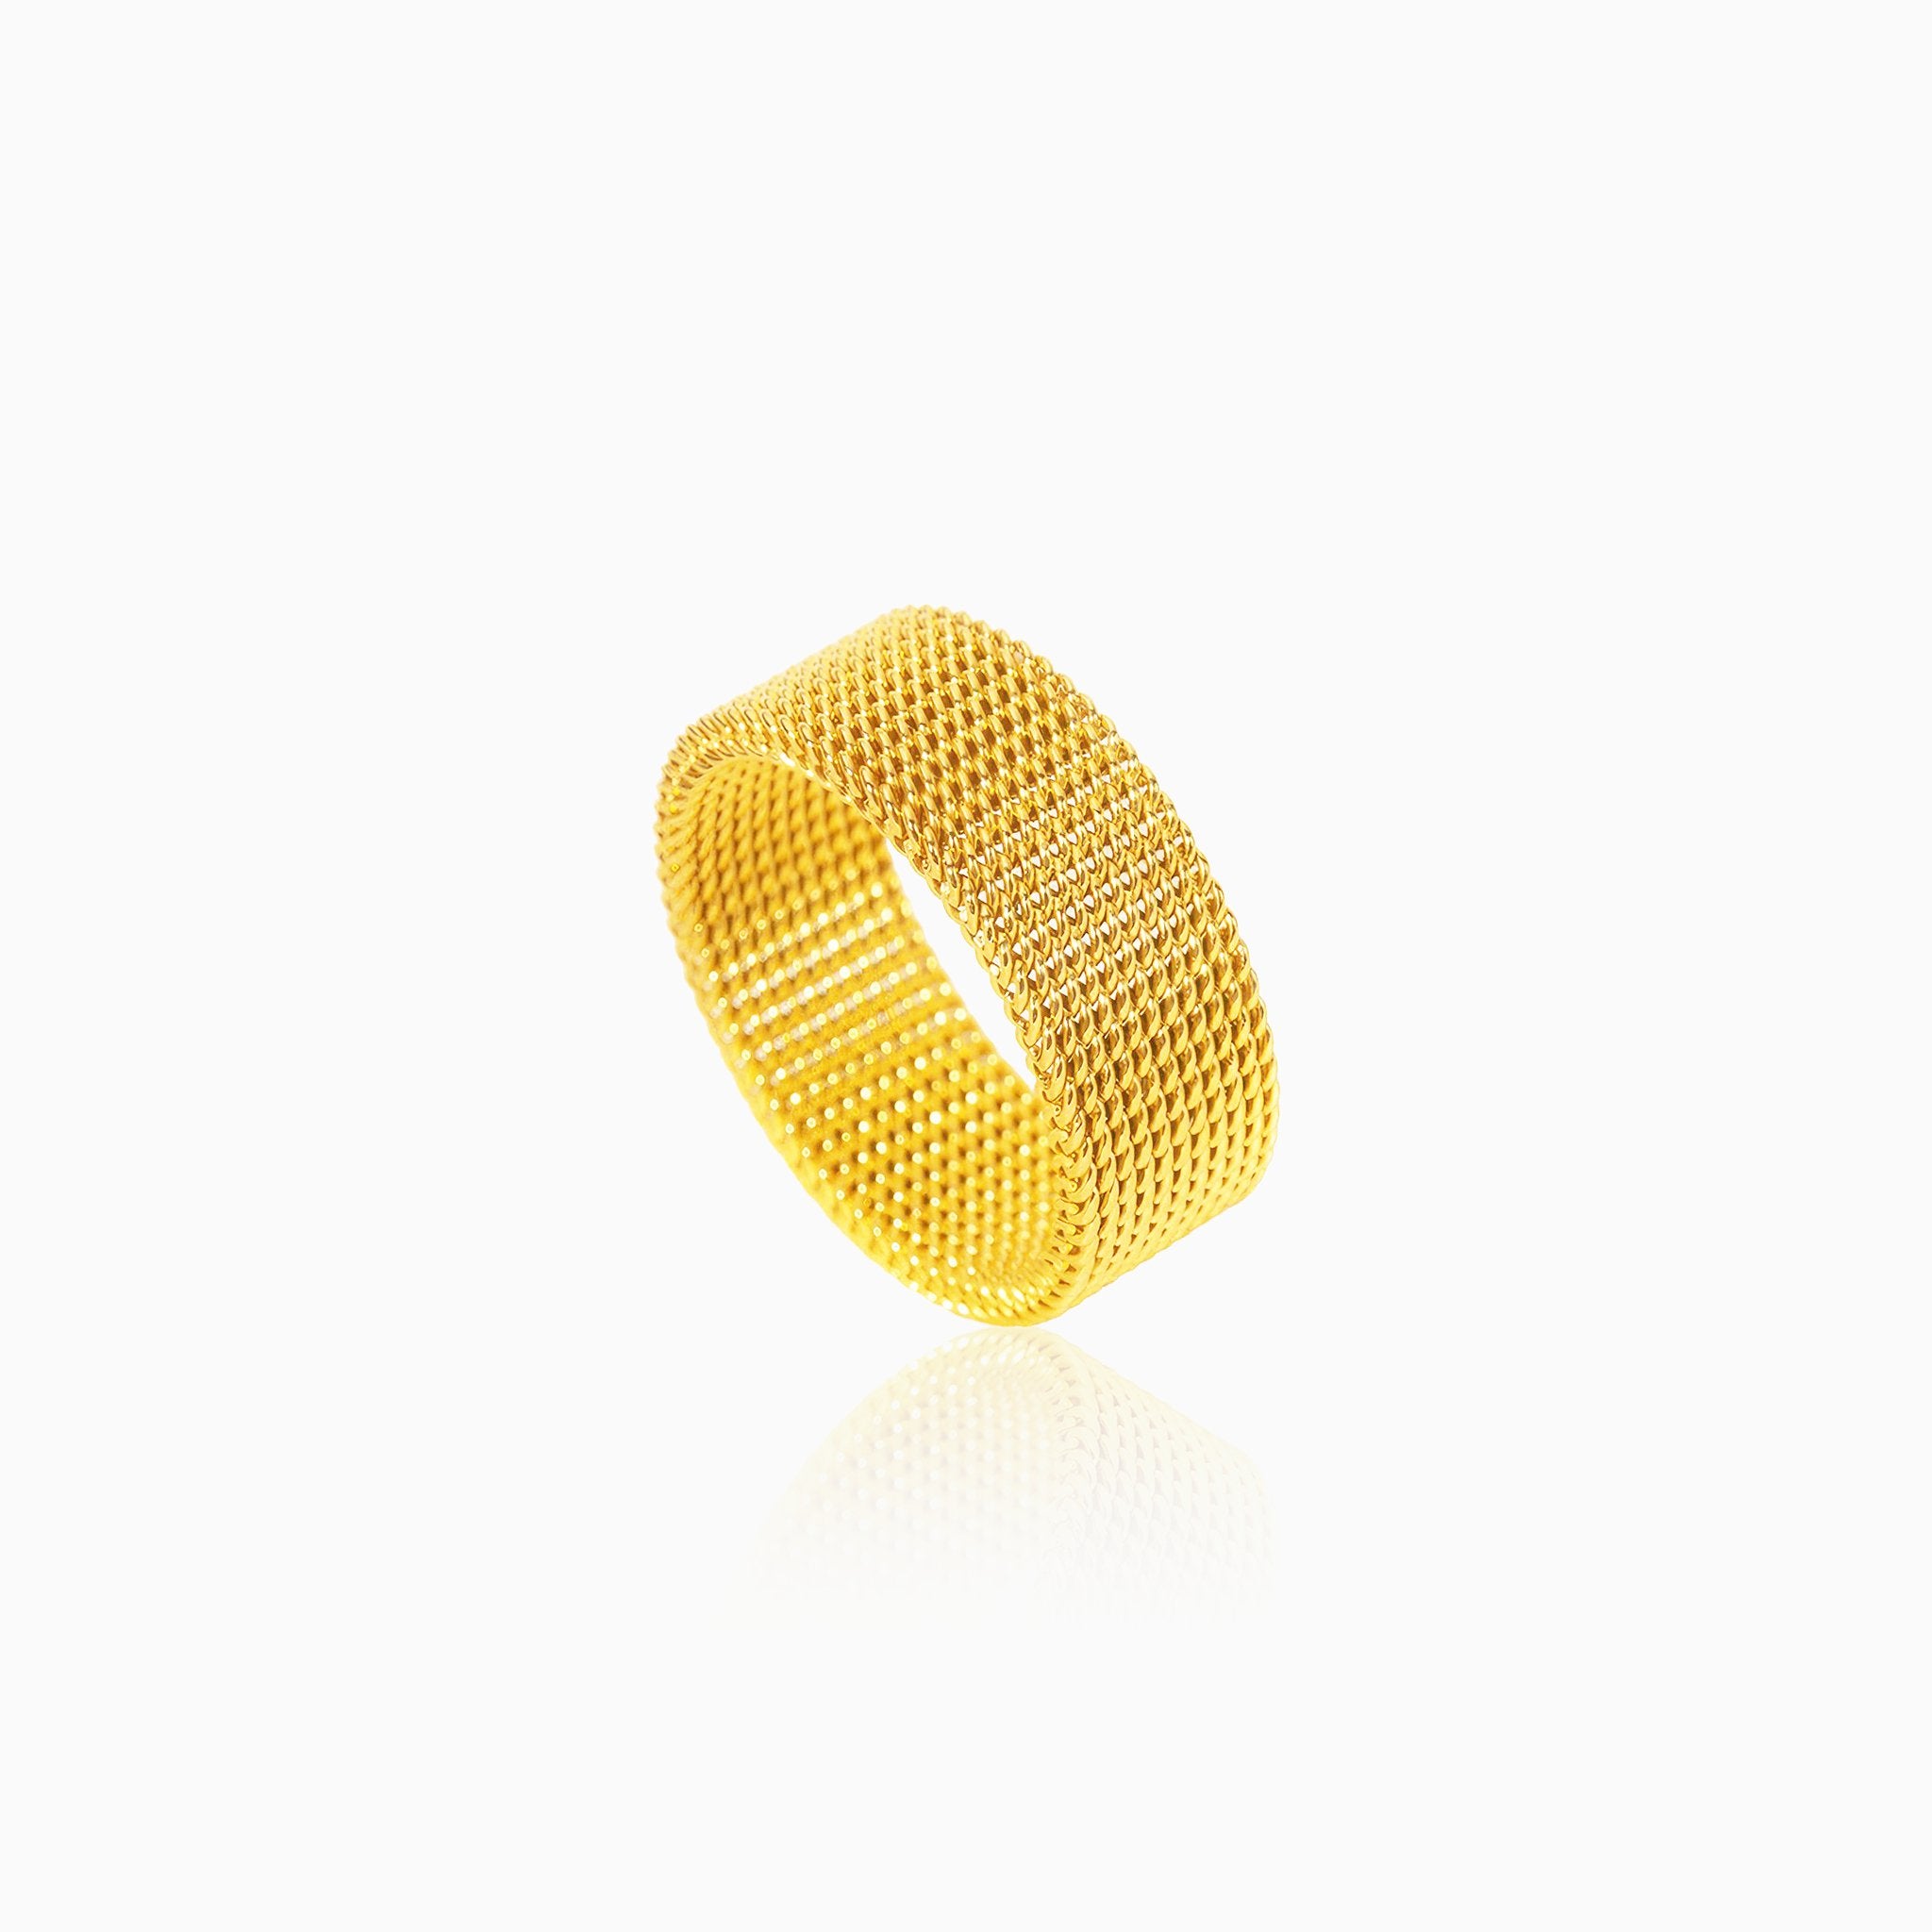 Intricate Woven Design Ring - Nobbier - Ring - 18K Gold And Titanium PVD Coated Jewelry